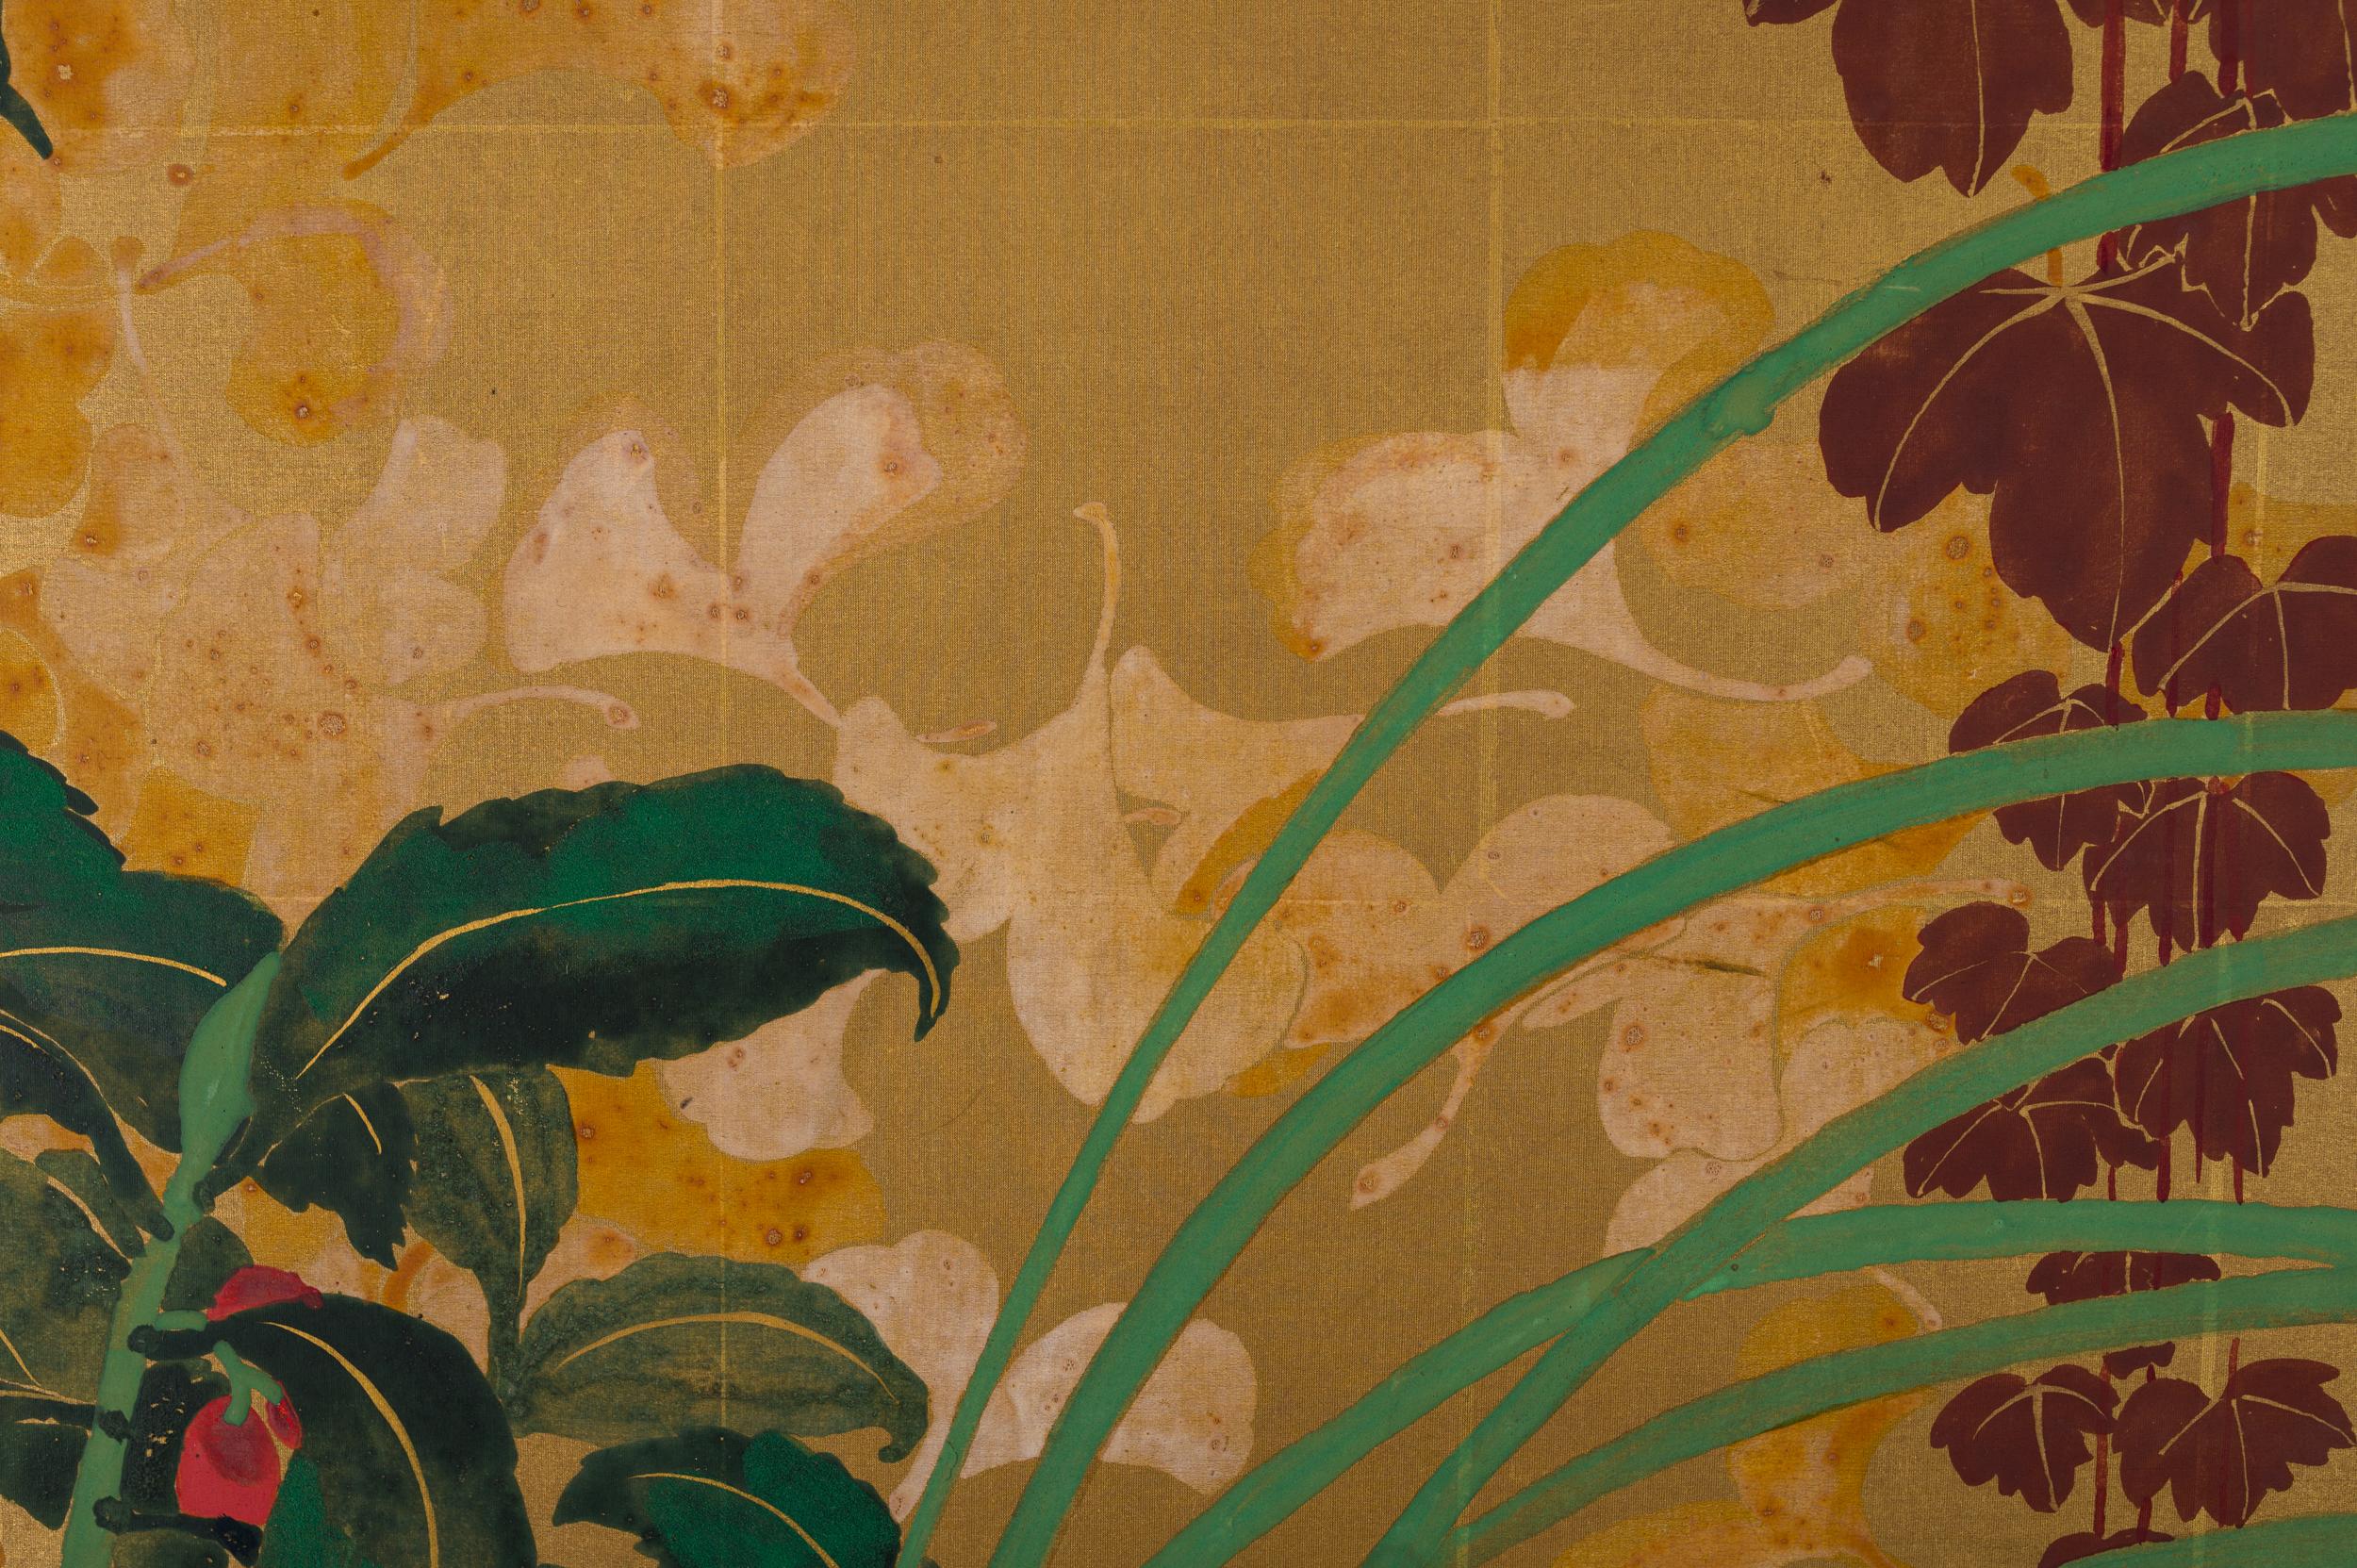 Japanese Two Panel Screen: Late Summer Into Fall, Taisho period (1912 - 1926) painting, featuring, hollyhocks, bellflowers, an autumn colored wood vine, chrysanthemums, and subtle falling ginko leaves in the background.  Painted in mineral pigments